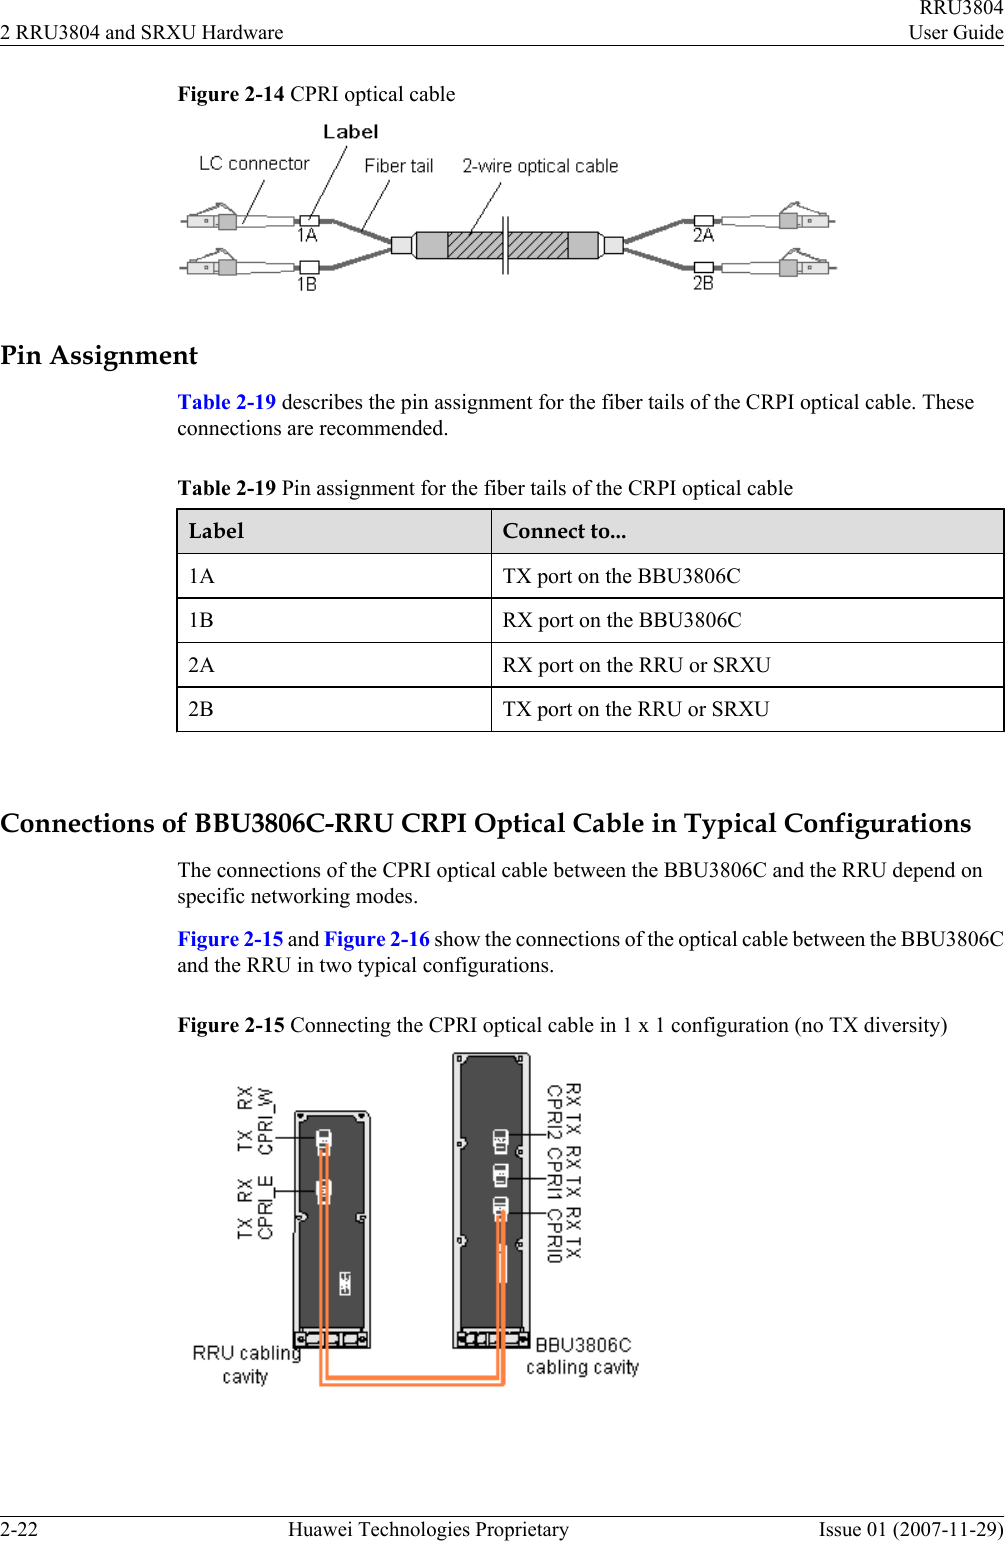 Figure 2-14 CPRI optical cablePin AssignmentTable 2-19 describes the pin assignment for the fiber tails of the CRPI optical cable. Theseconnections are recommended.Table 2-19 Pin assignment for the fiber tails of the CRPI optical cableLabel Connect to...1A TX port on the BBU3806C1B RX port on the BBU3806C2A RX port on the RRU or SRXU2B TX port on the RRU or SRXU Connections of BBU3806C-RRU CRPI Optical Cable in Typical ConfigurationsThe connections of the CPRI optical cable between the BBU3806C and the RRU depend onspecific networking modes.Figure 2-15 and Figure 2-16 show the connections of the optical cable between the BBU3806Cand the RRU in two typical configurations.Figure 2-15 Connecting the CPRI optical cable in 1 x 1 configuration (no TX diversity)2 RRU3804 and SRXU HardwareRRU3804User Guide2-22 Huawei Technologies Proprietary Issue 01 (2007-11-29)